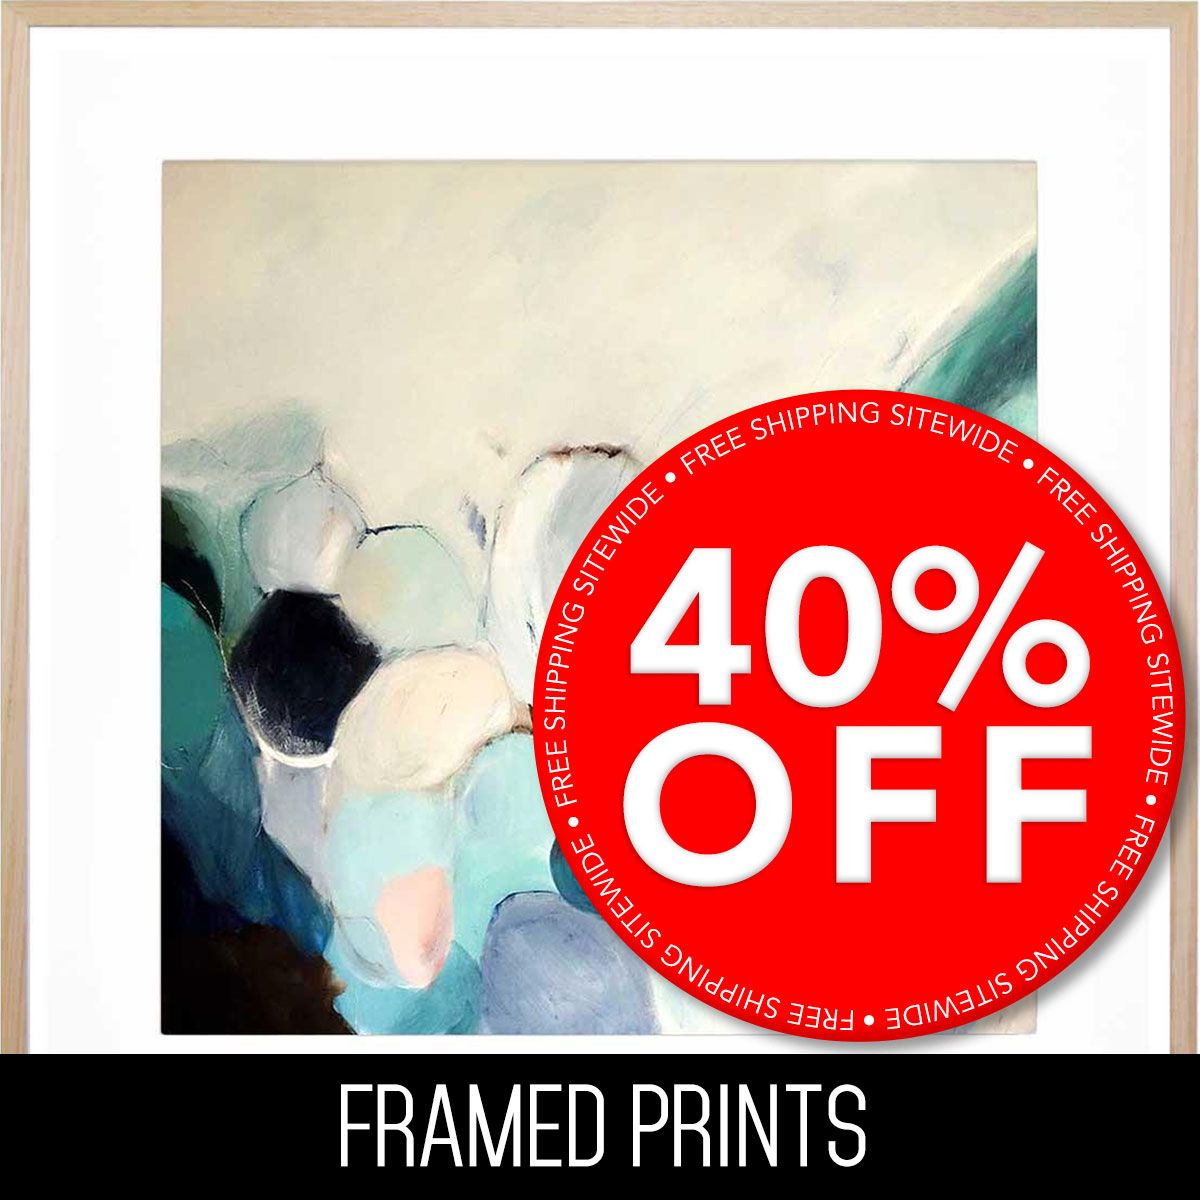 View All Framed Prints